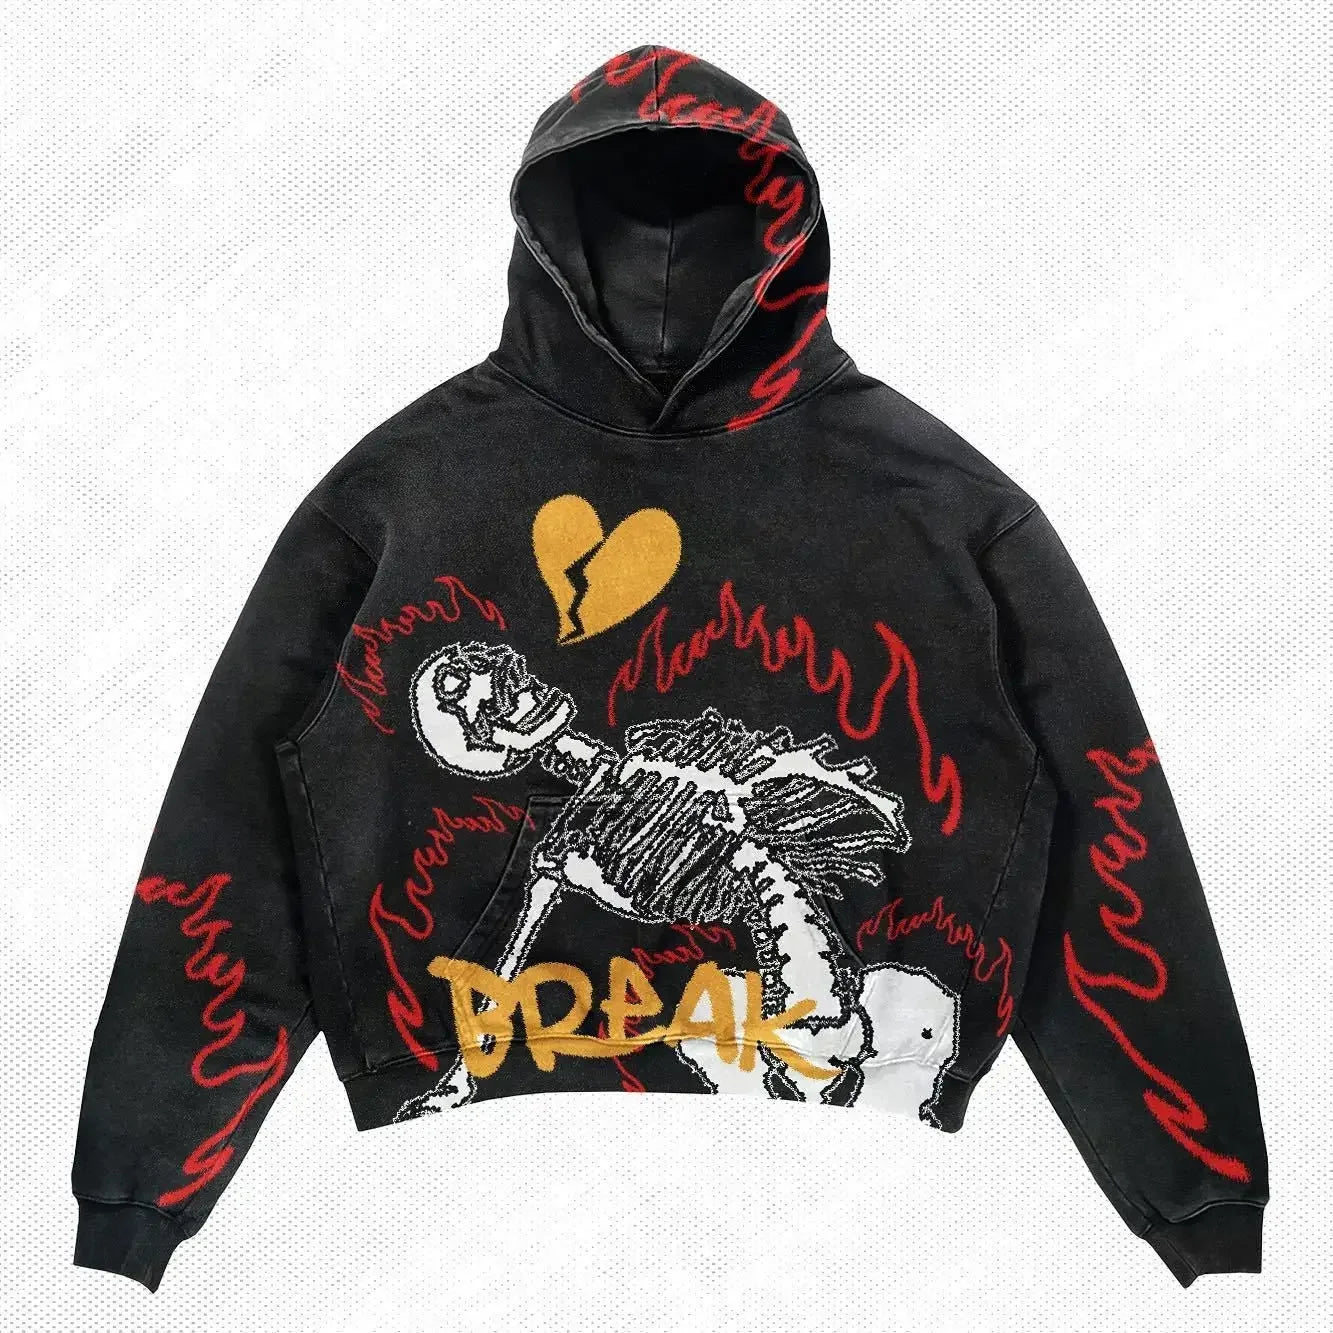 The Explosions Printed Skull Y2K Retro Hooded Sweater Coat Street Style Gothic Casual Fashion Hooded Sweater Men's Female by Maramalive™ is perfect for embracing punk style across all four seasons.